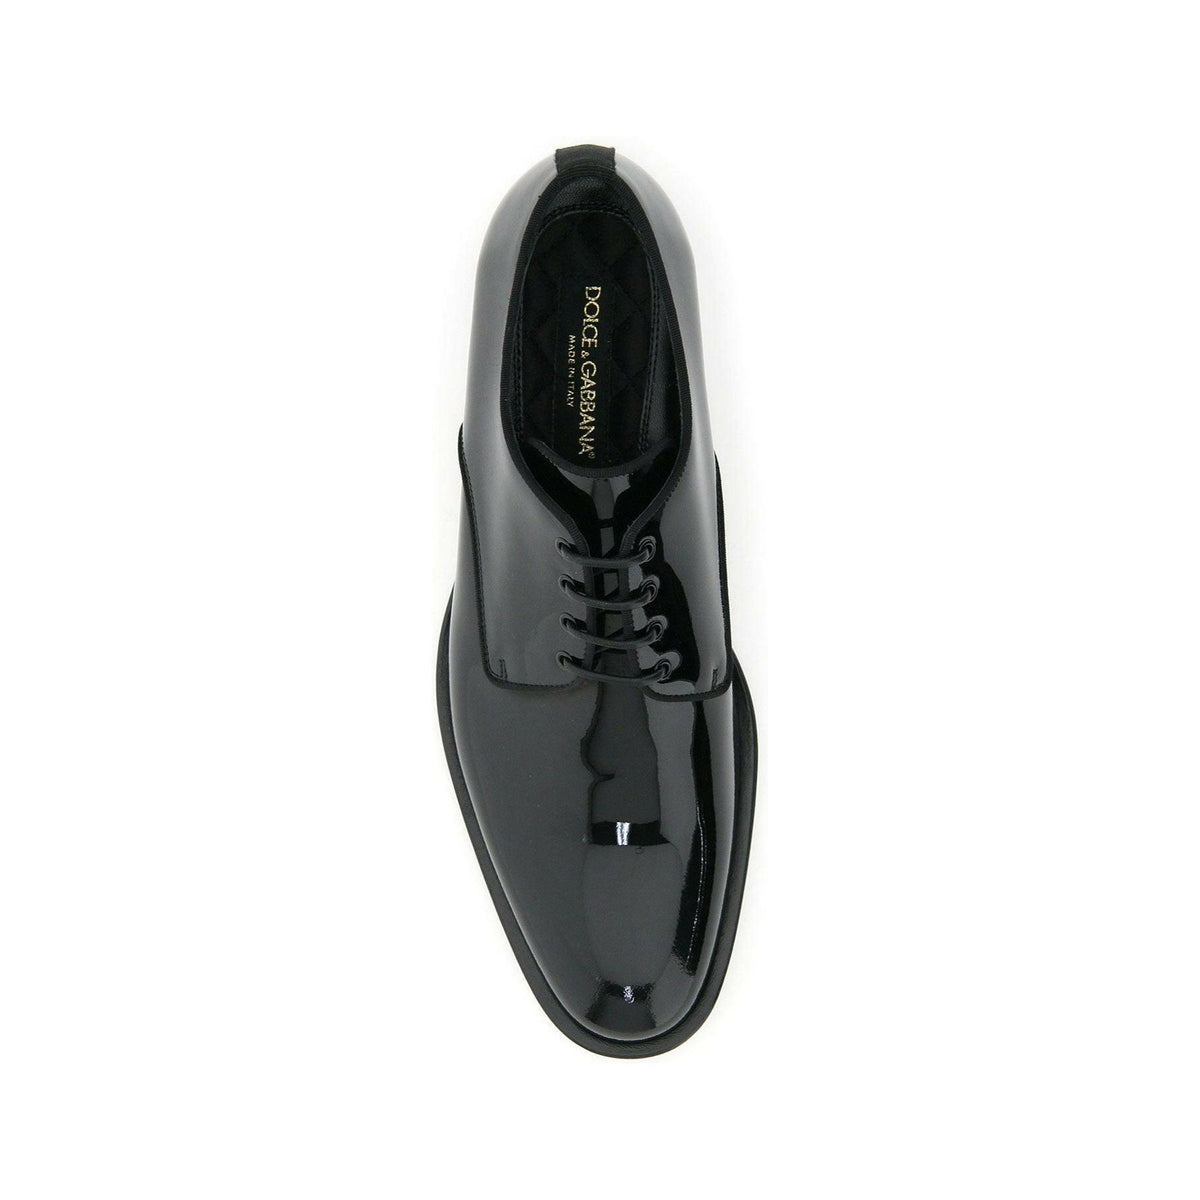 DOLCE & GABBANA - Black Patent Leather Lace Up Derby Shoes With Grosgrain Hems - JOHN JULIA